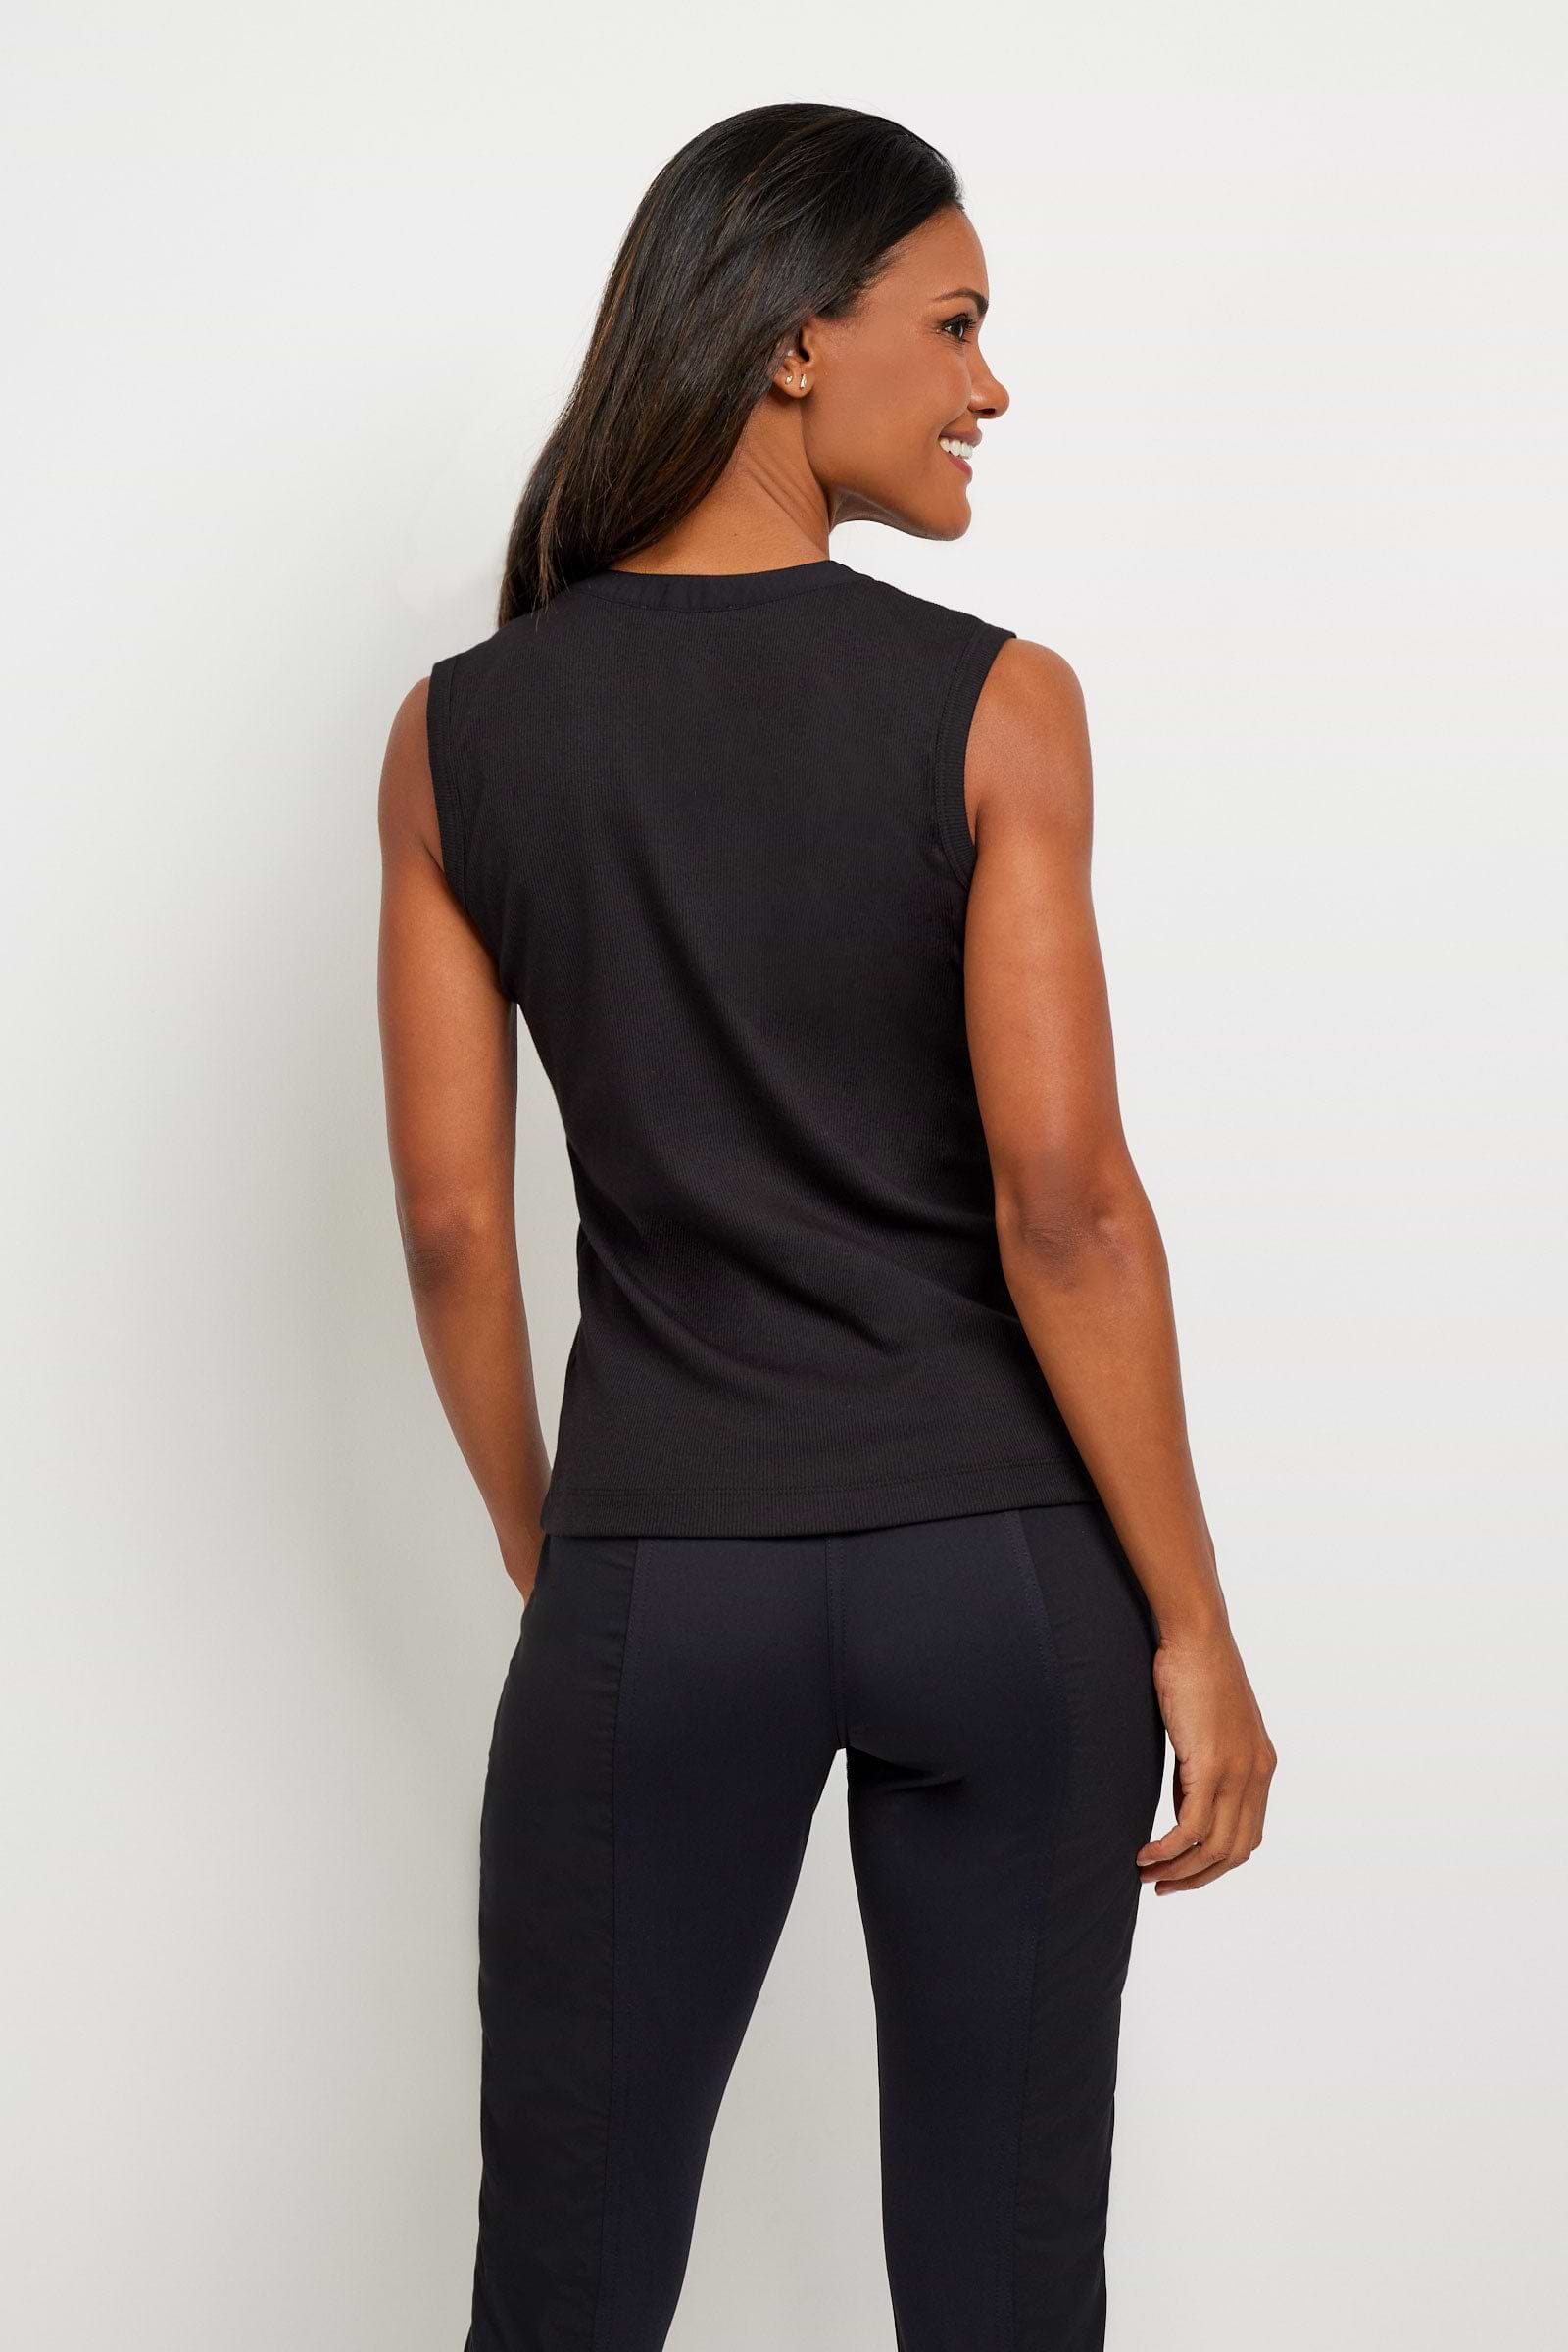 The Best Travel Top. Woman Showing the Back Profile of a Madelyn Top in Black.